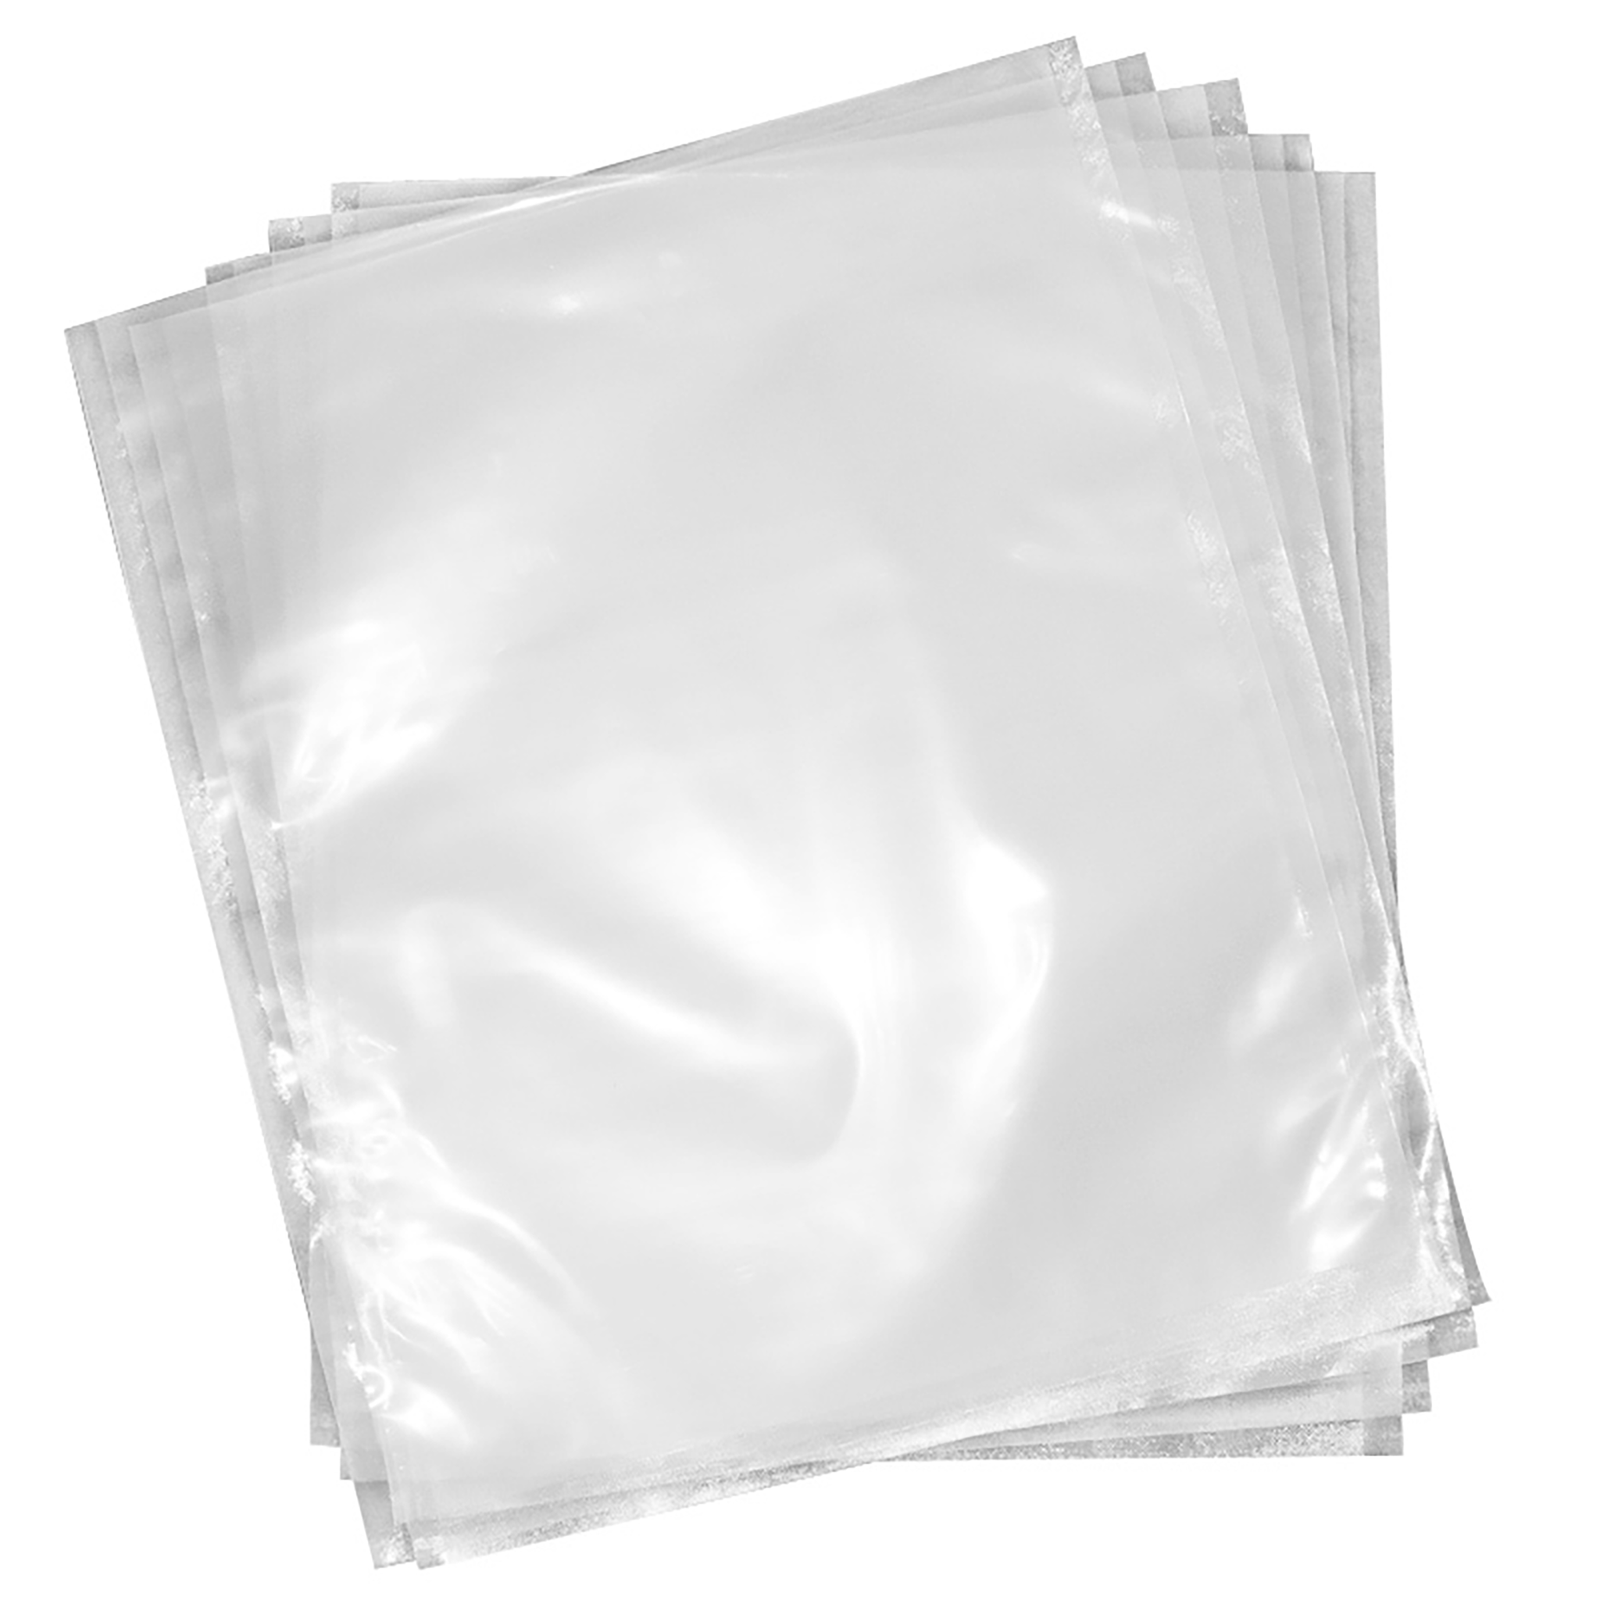 Vacuum Sealer Bags – 500 Units - 14x16 by Hal Packaging Consumables